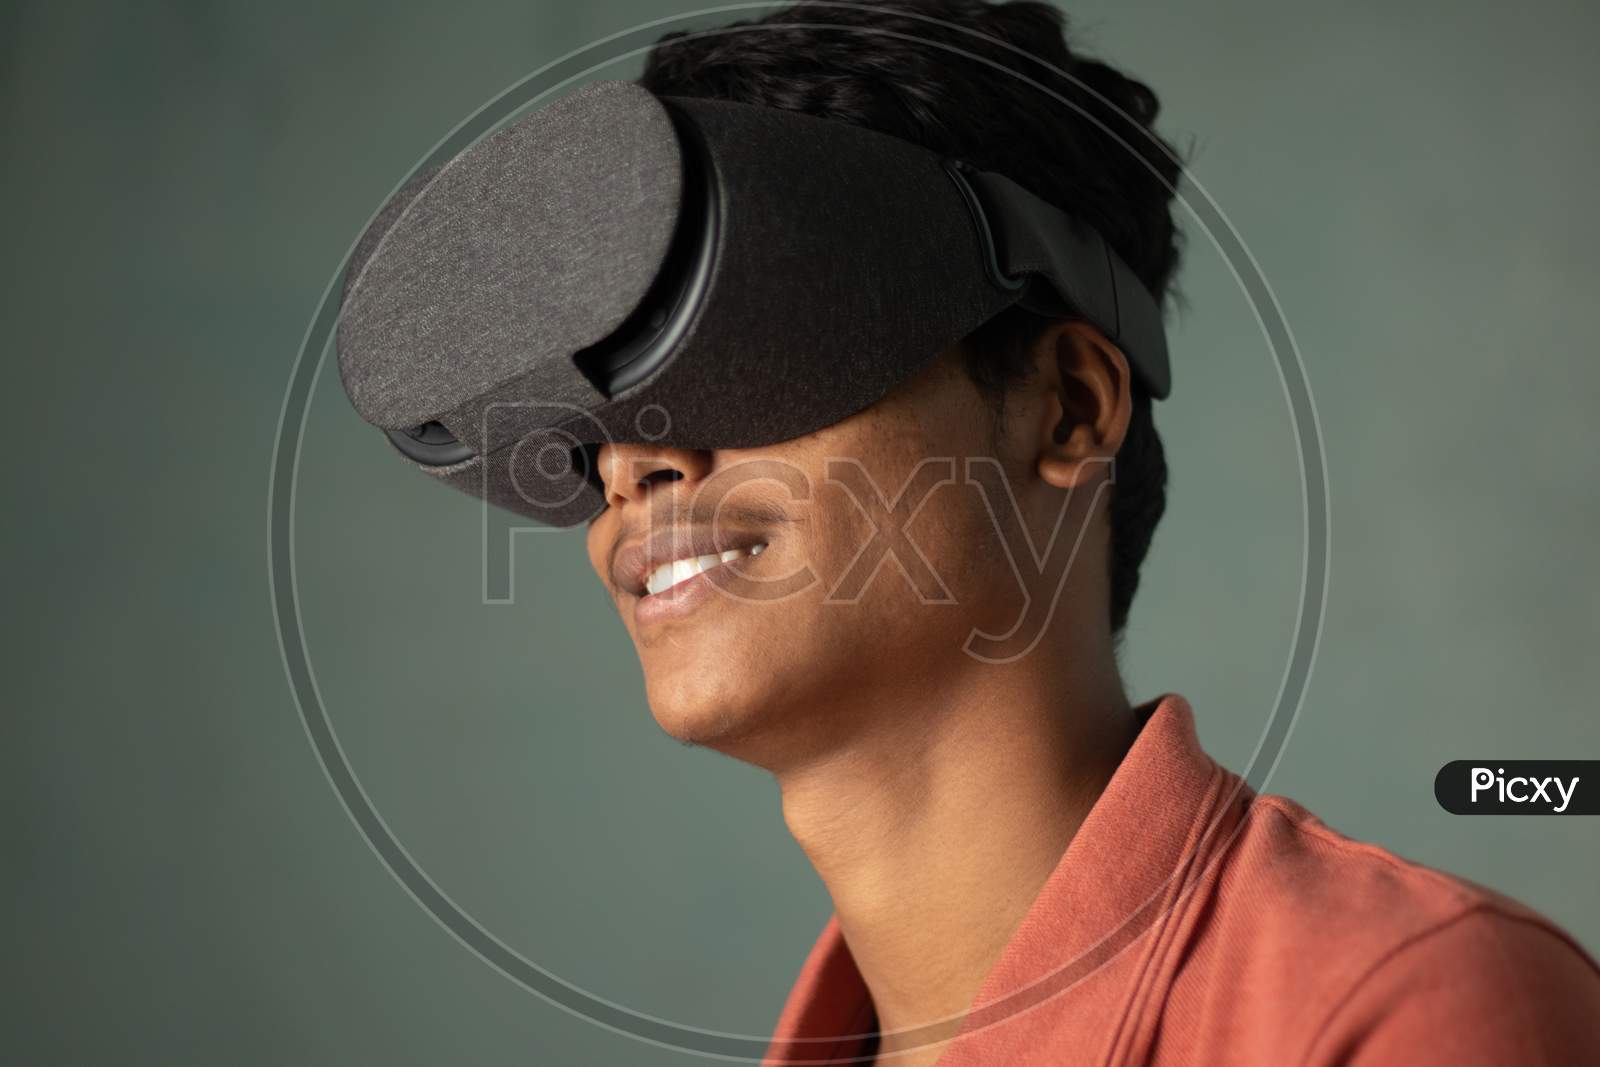 Portrait Of A Young Man Experiencing Virtual Reality Through A Vr Headset.